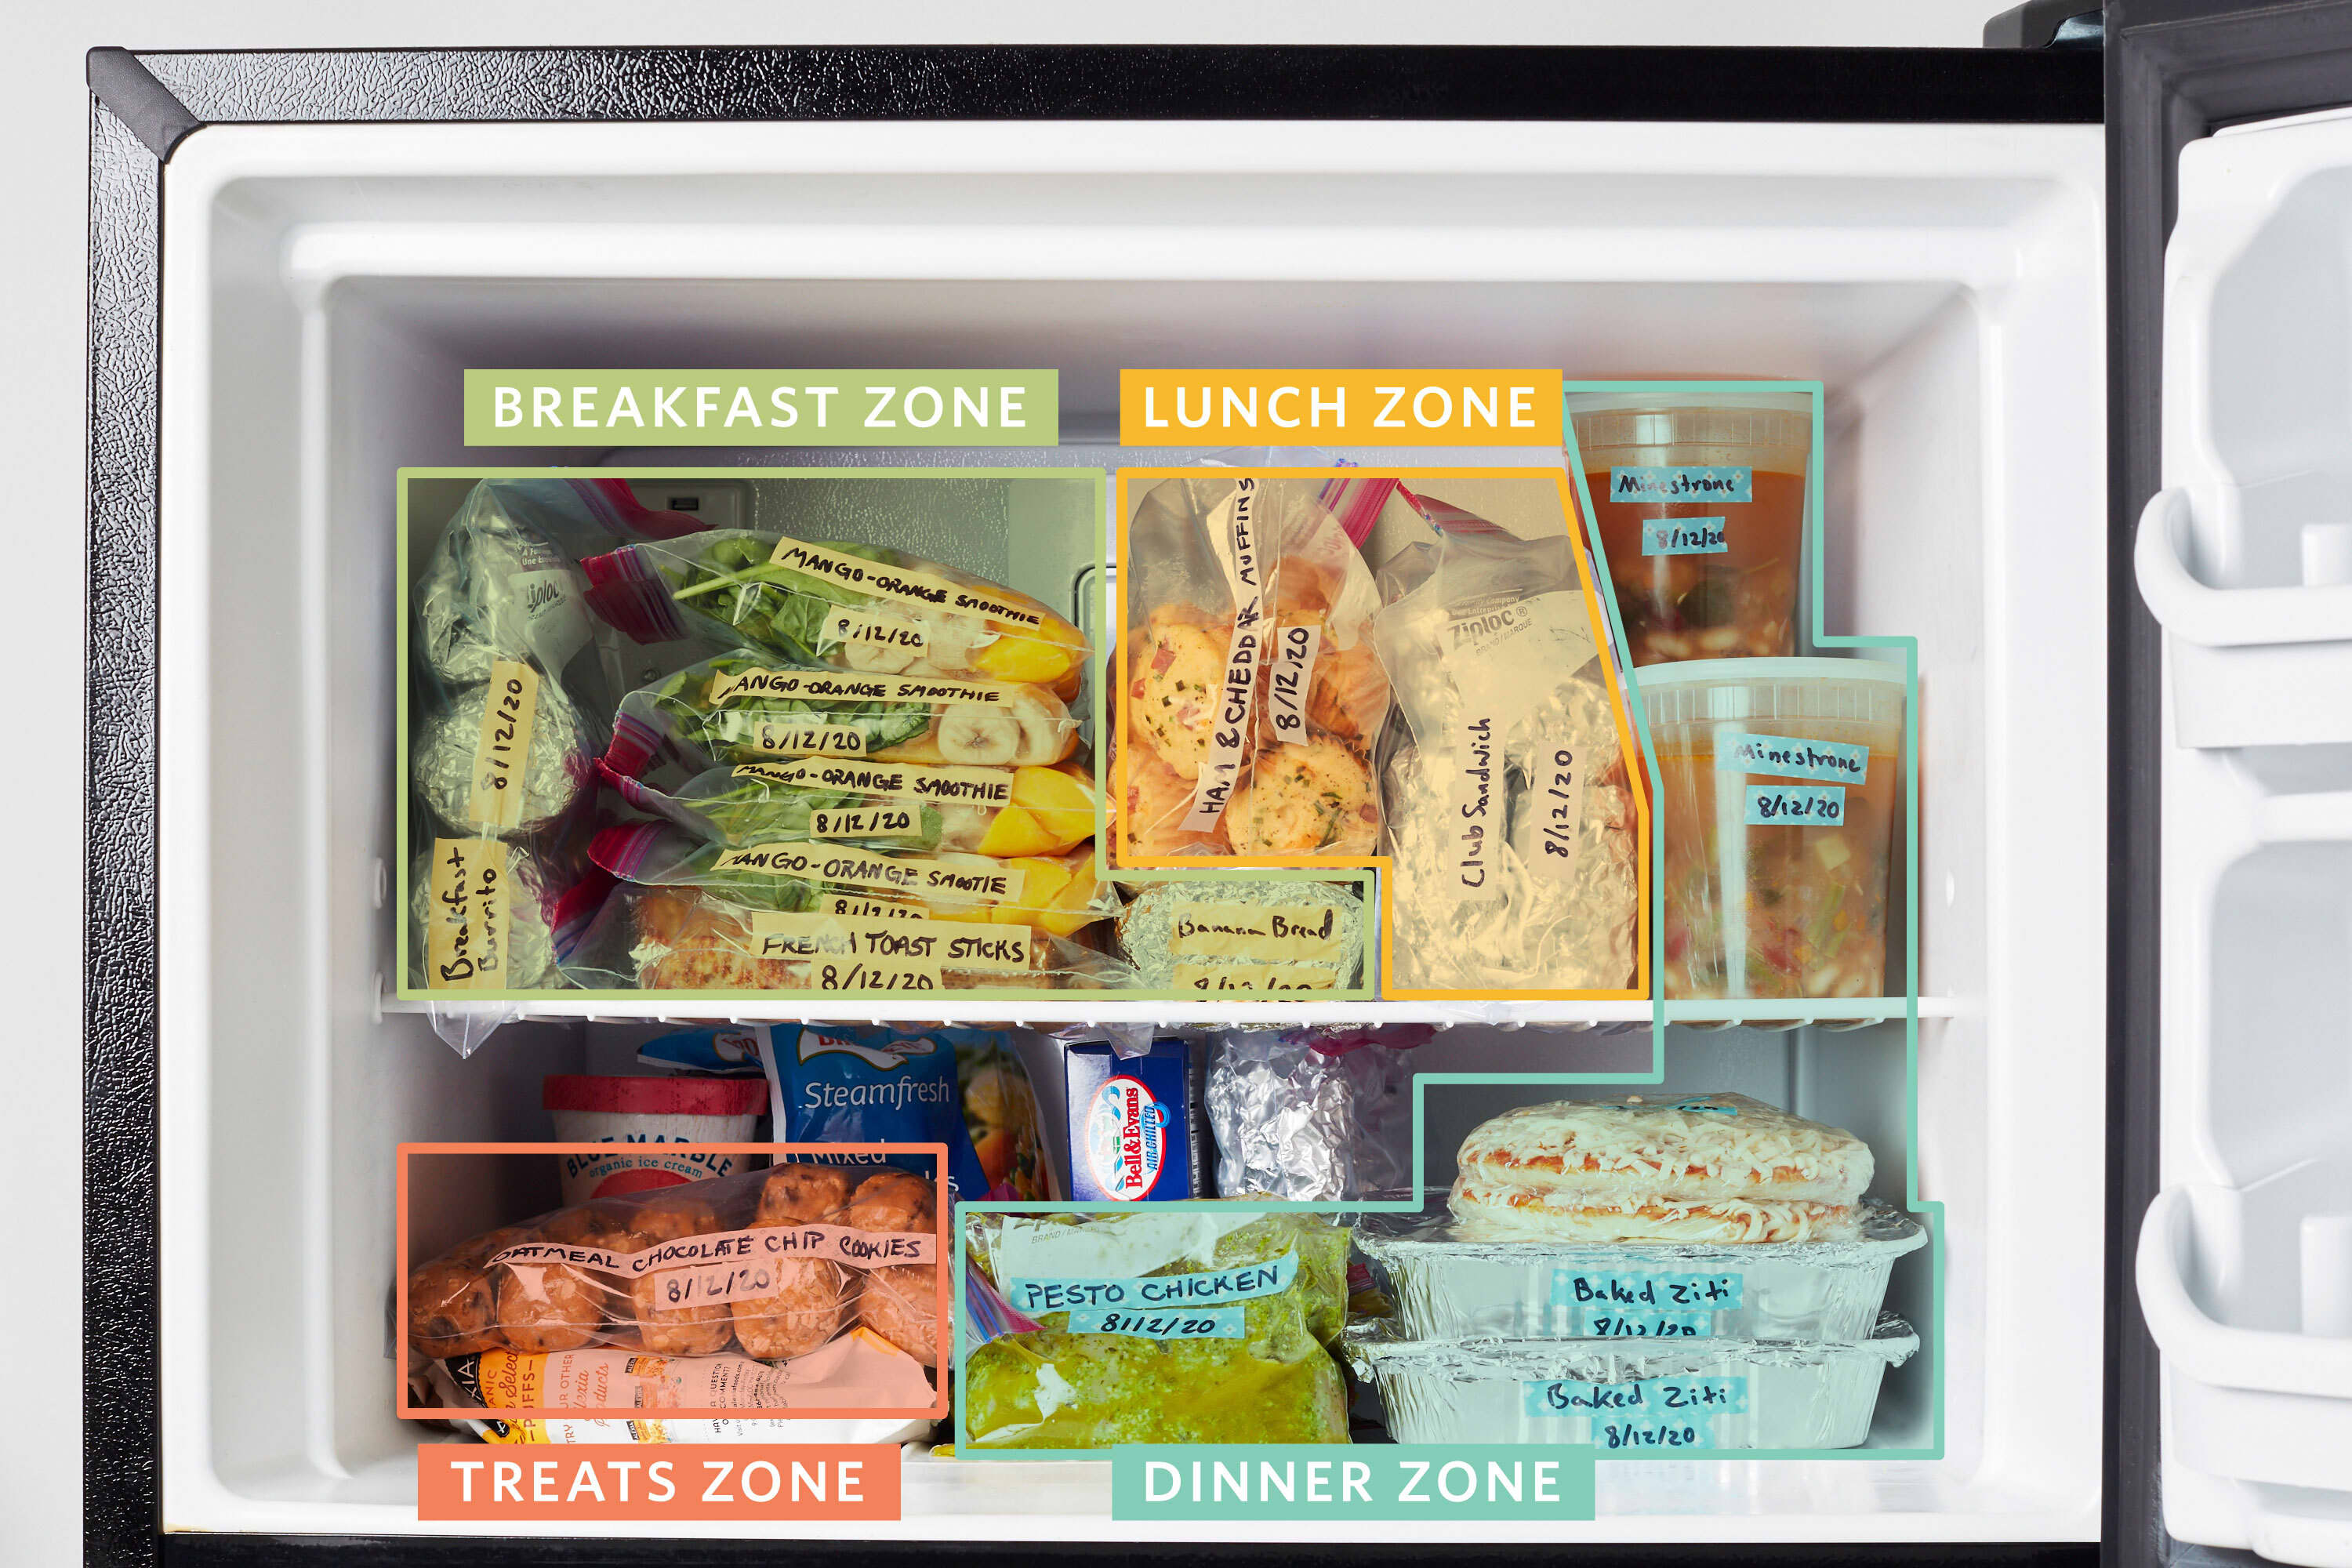 Step-By-Step Guide to Stocking the Freezer